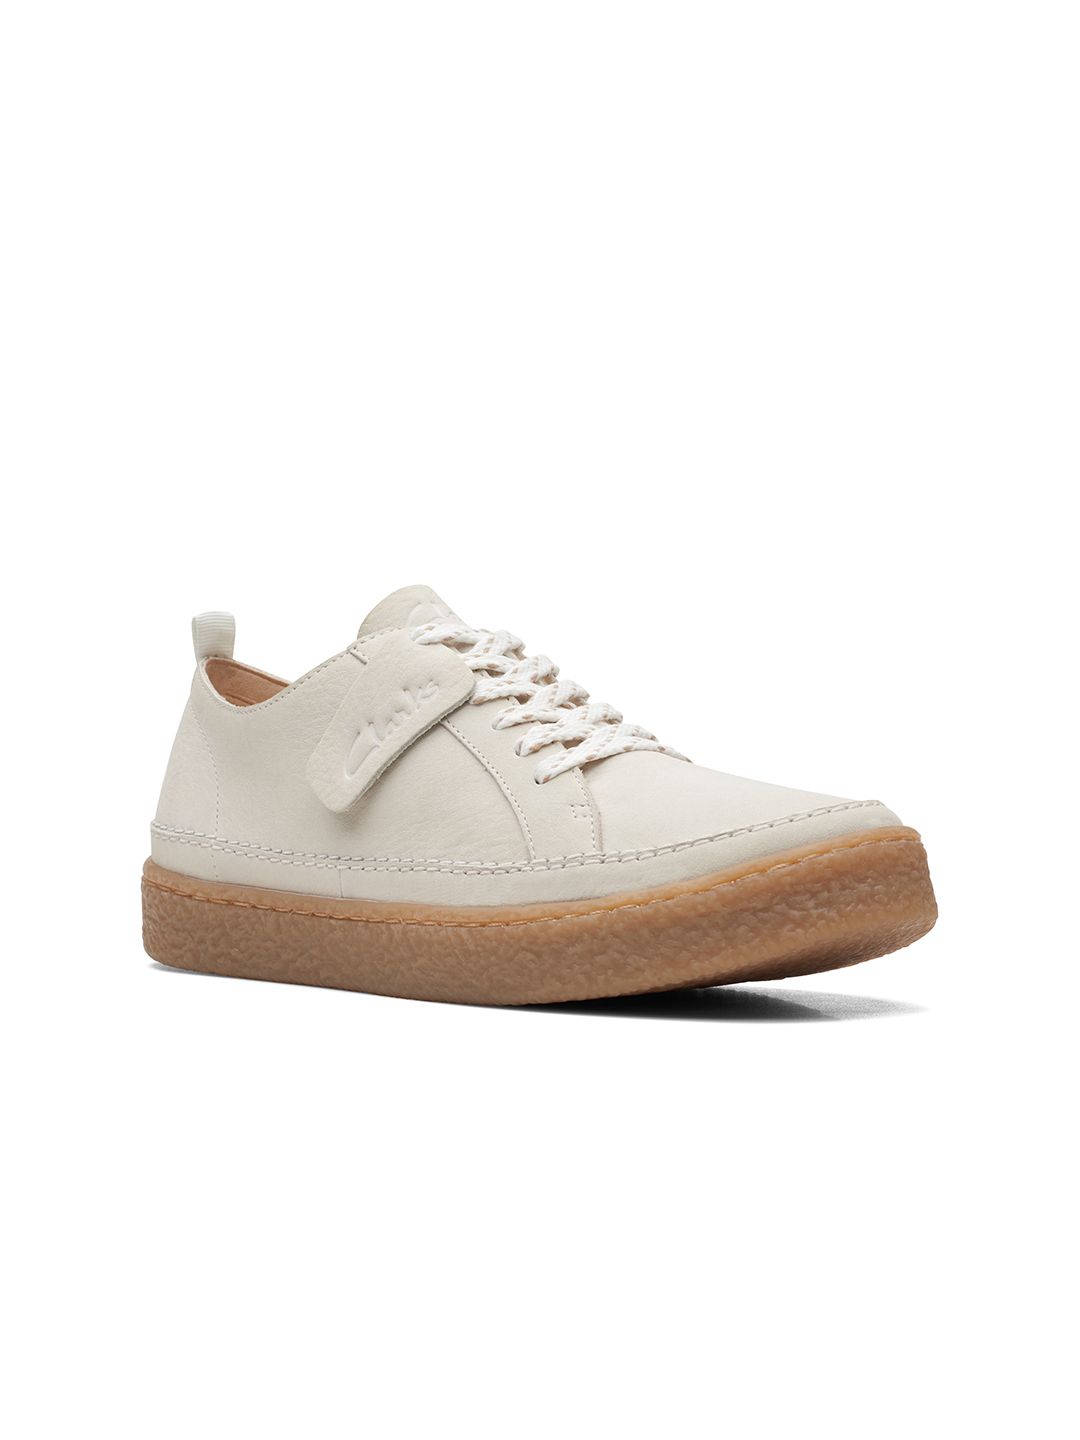 Clarks Women White Leather Sneakers Price in India